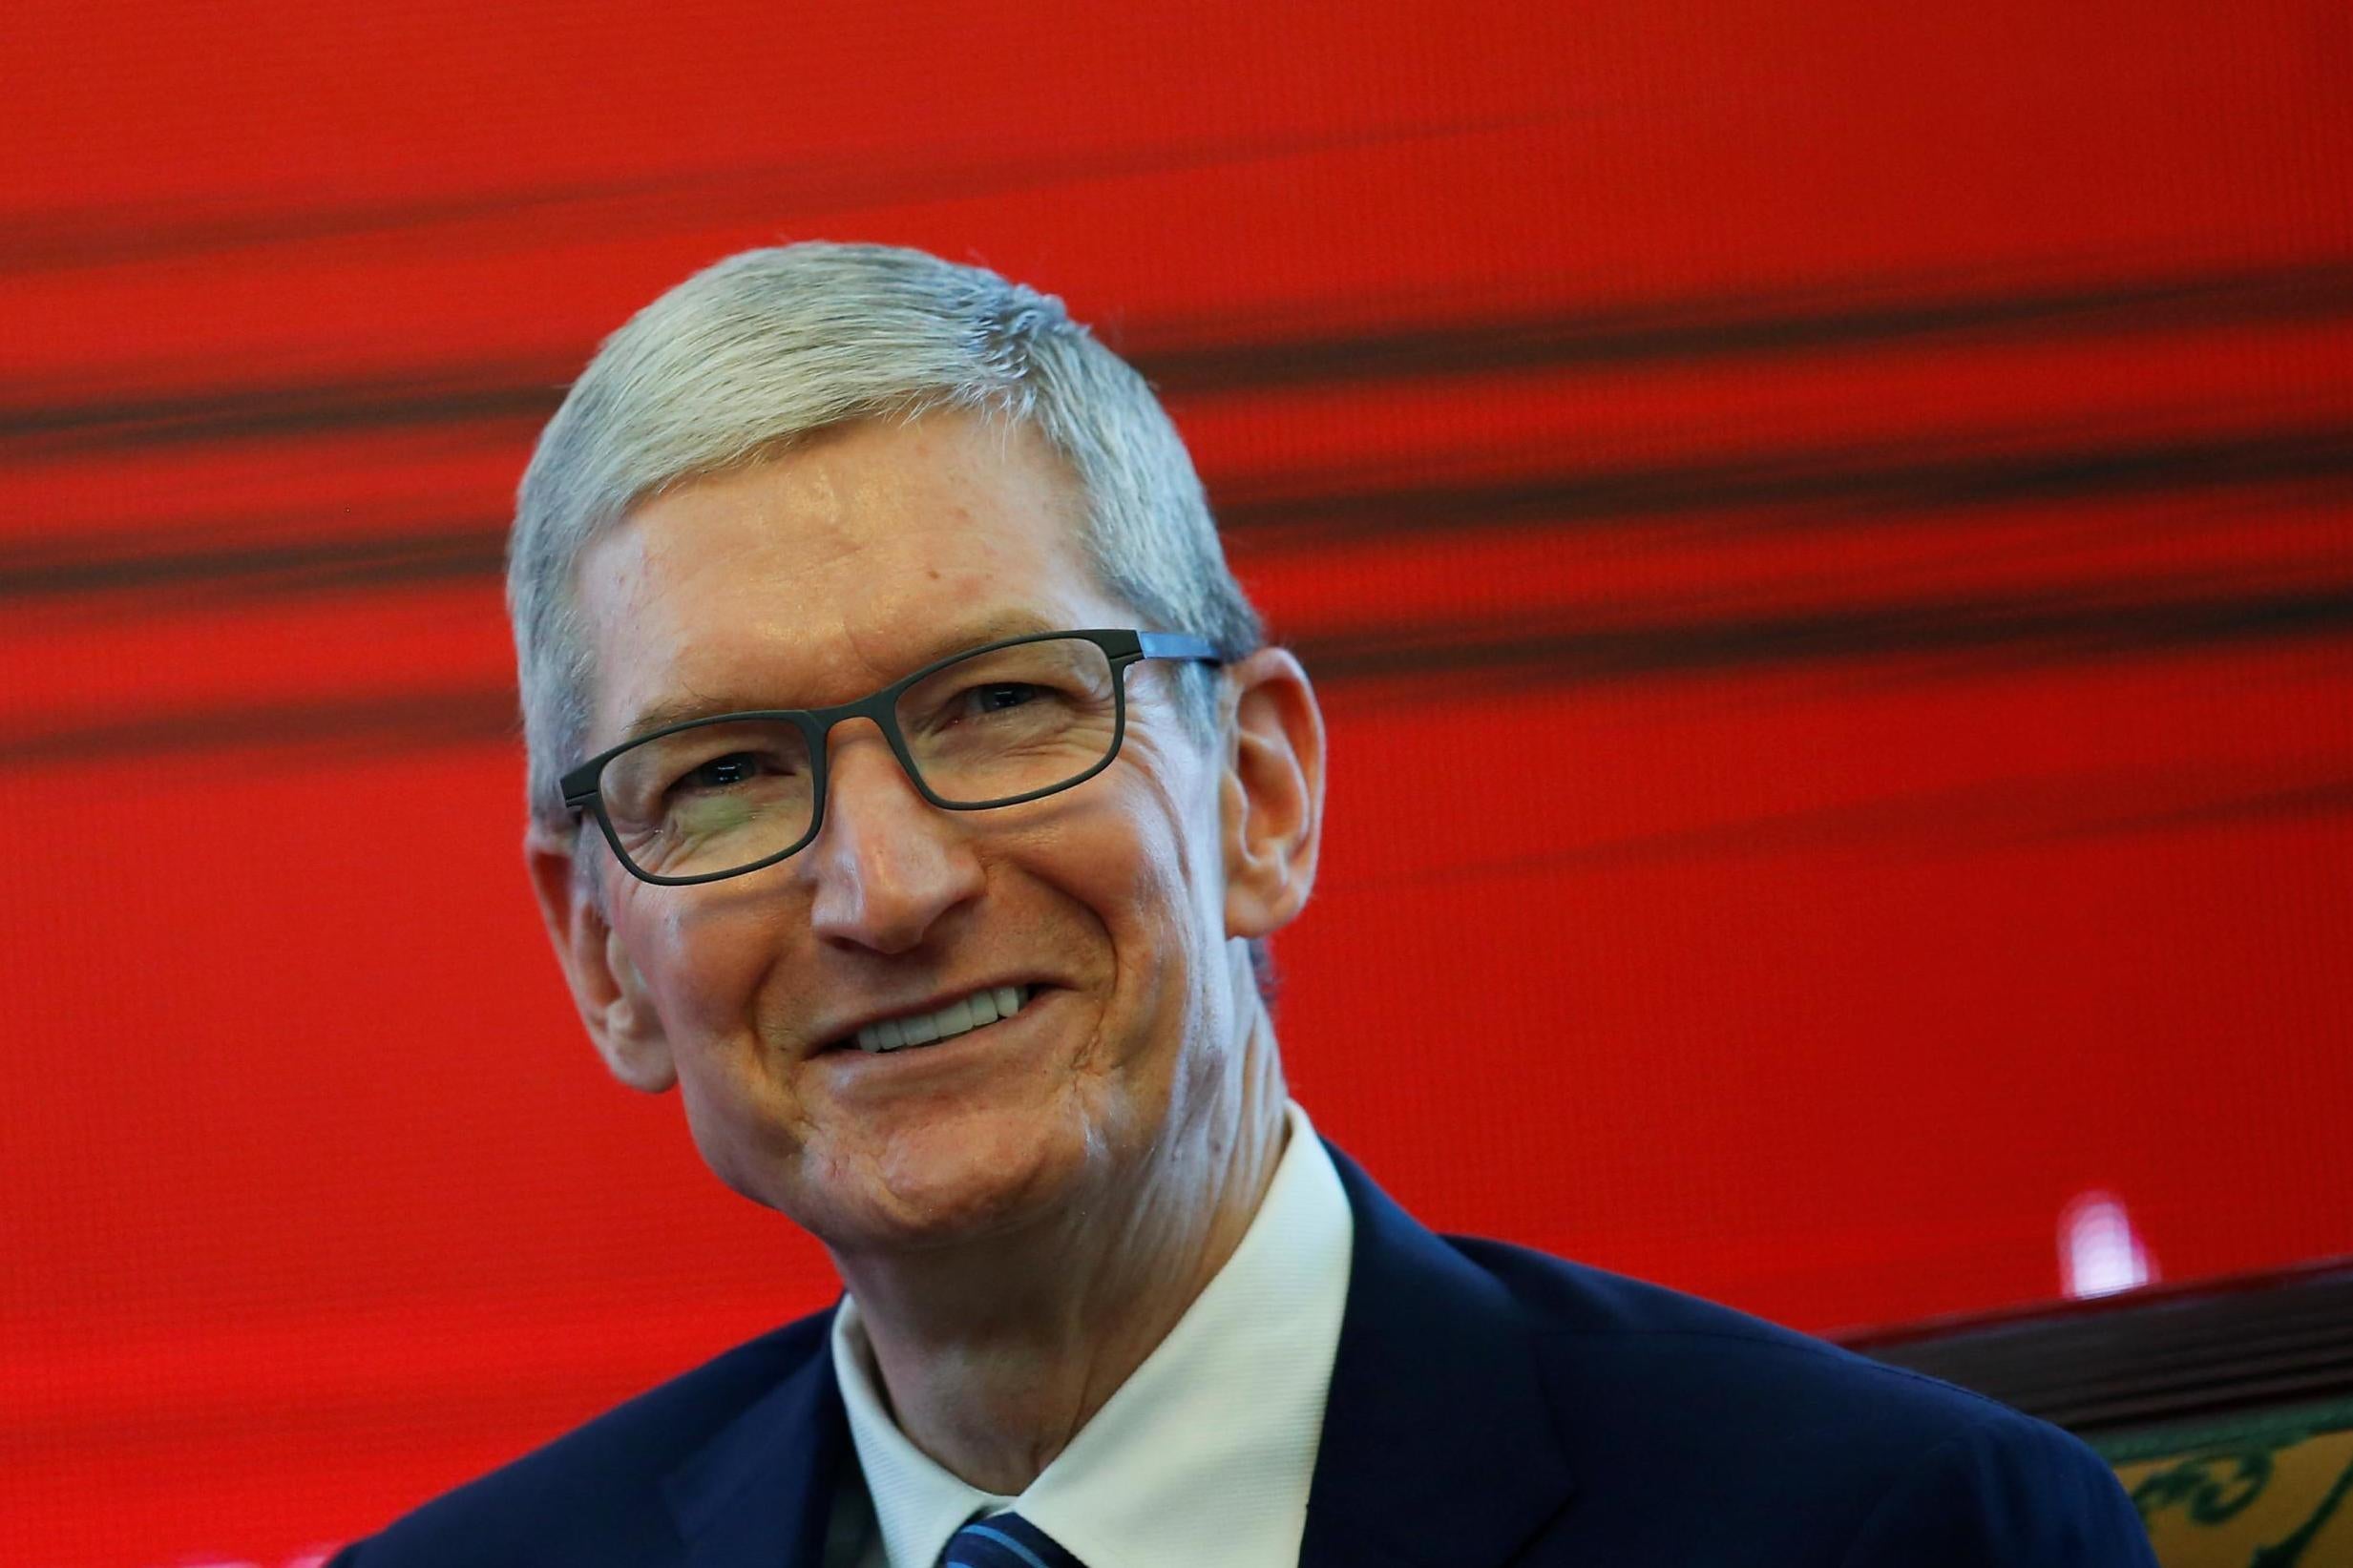 “We pay all the taxes we owe, every single dollar,” Apple boss Tim Cook told the US Senate in 2013